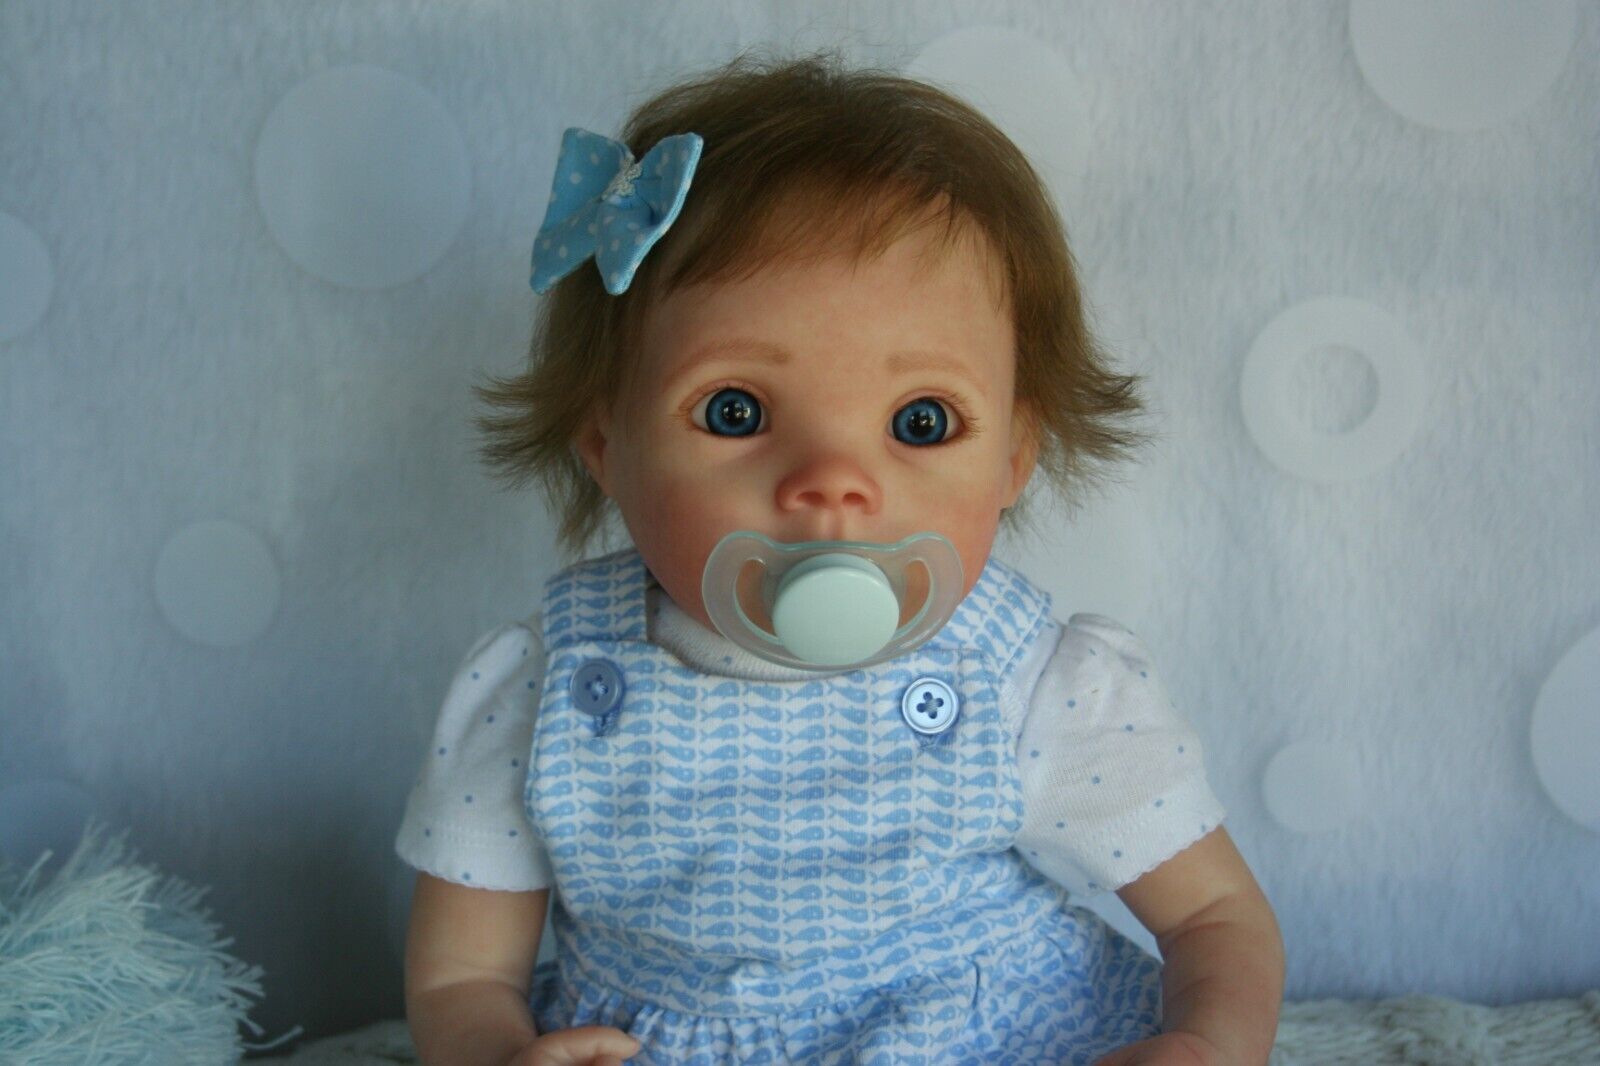 Ooak Reborn Doll Bountiful Baby Mallory Limited Edition Sold Out Girl by Serena